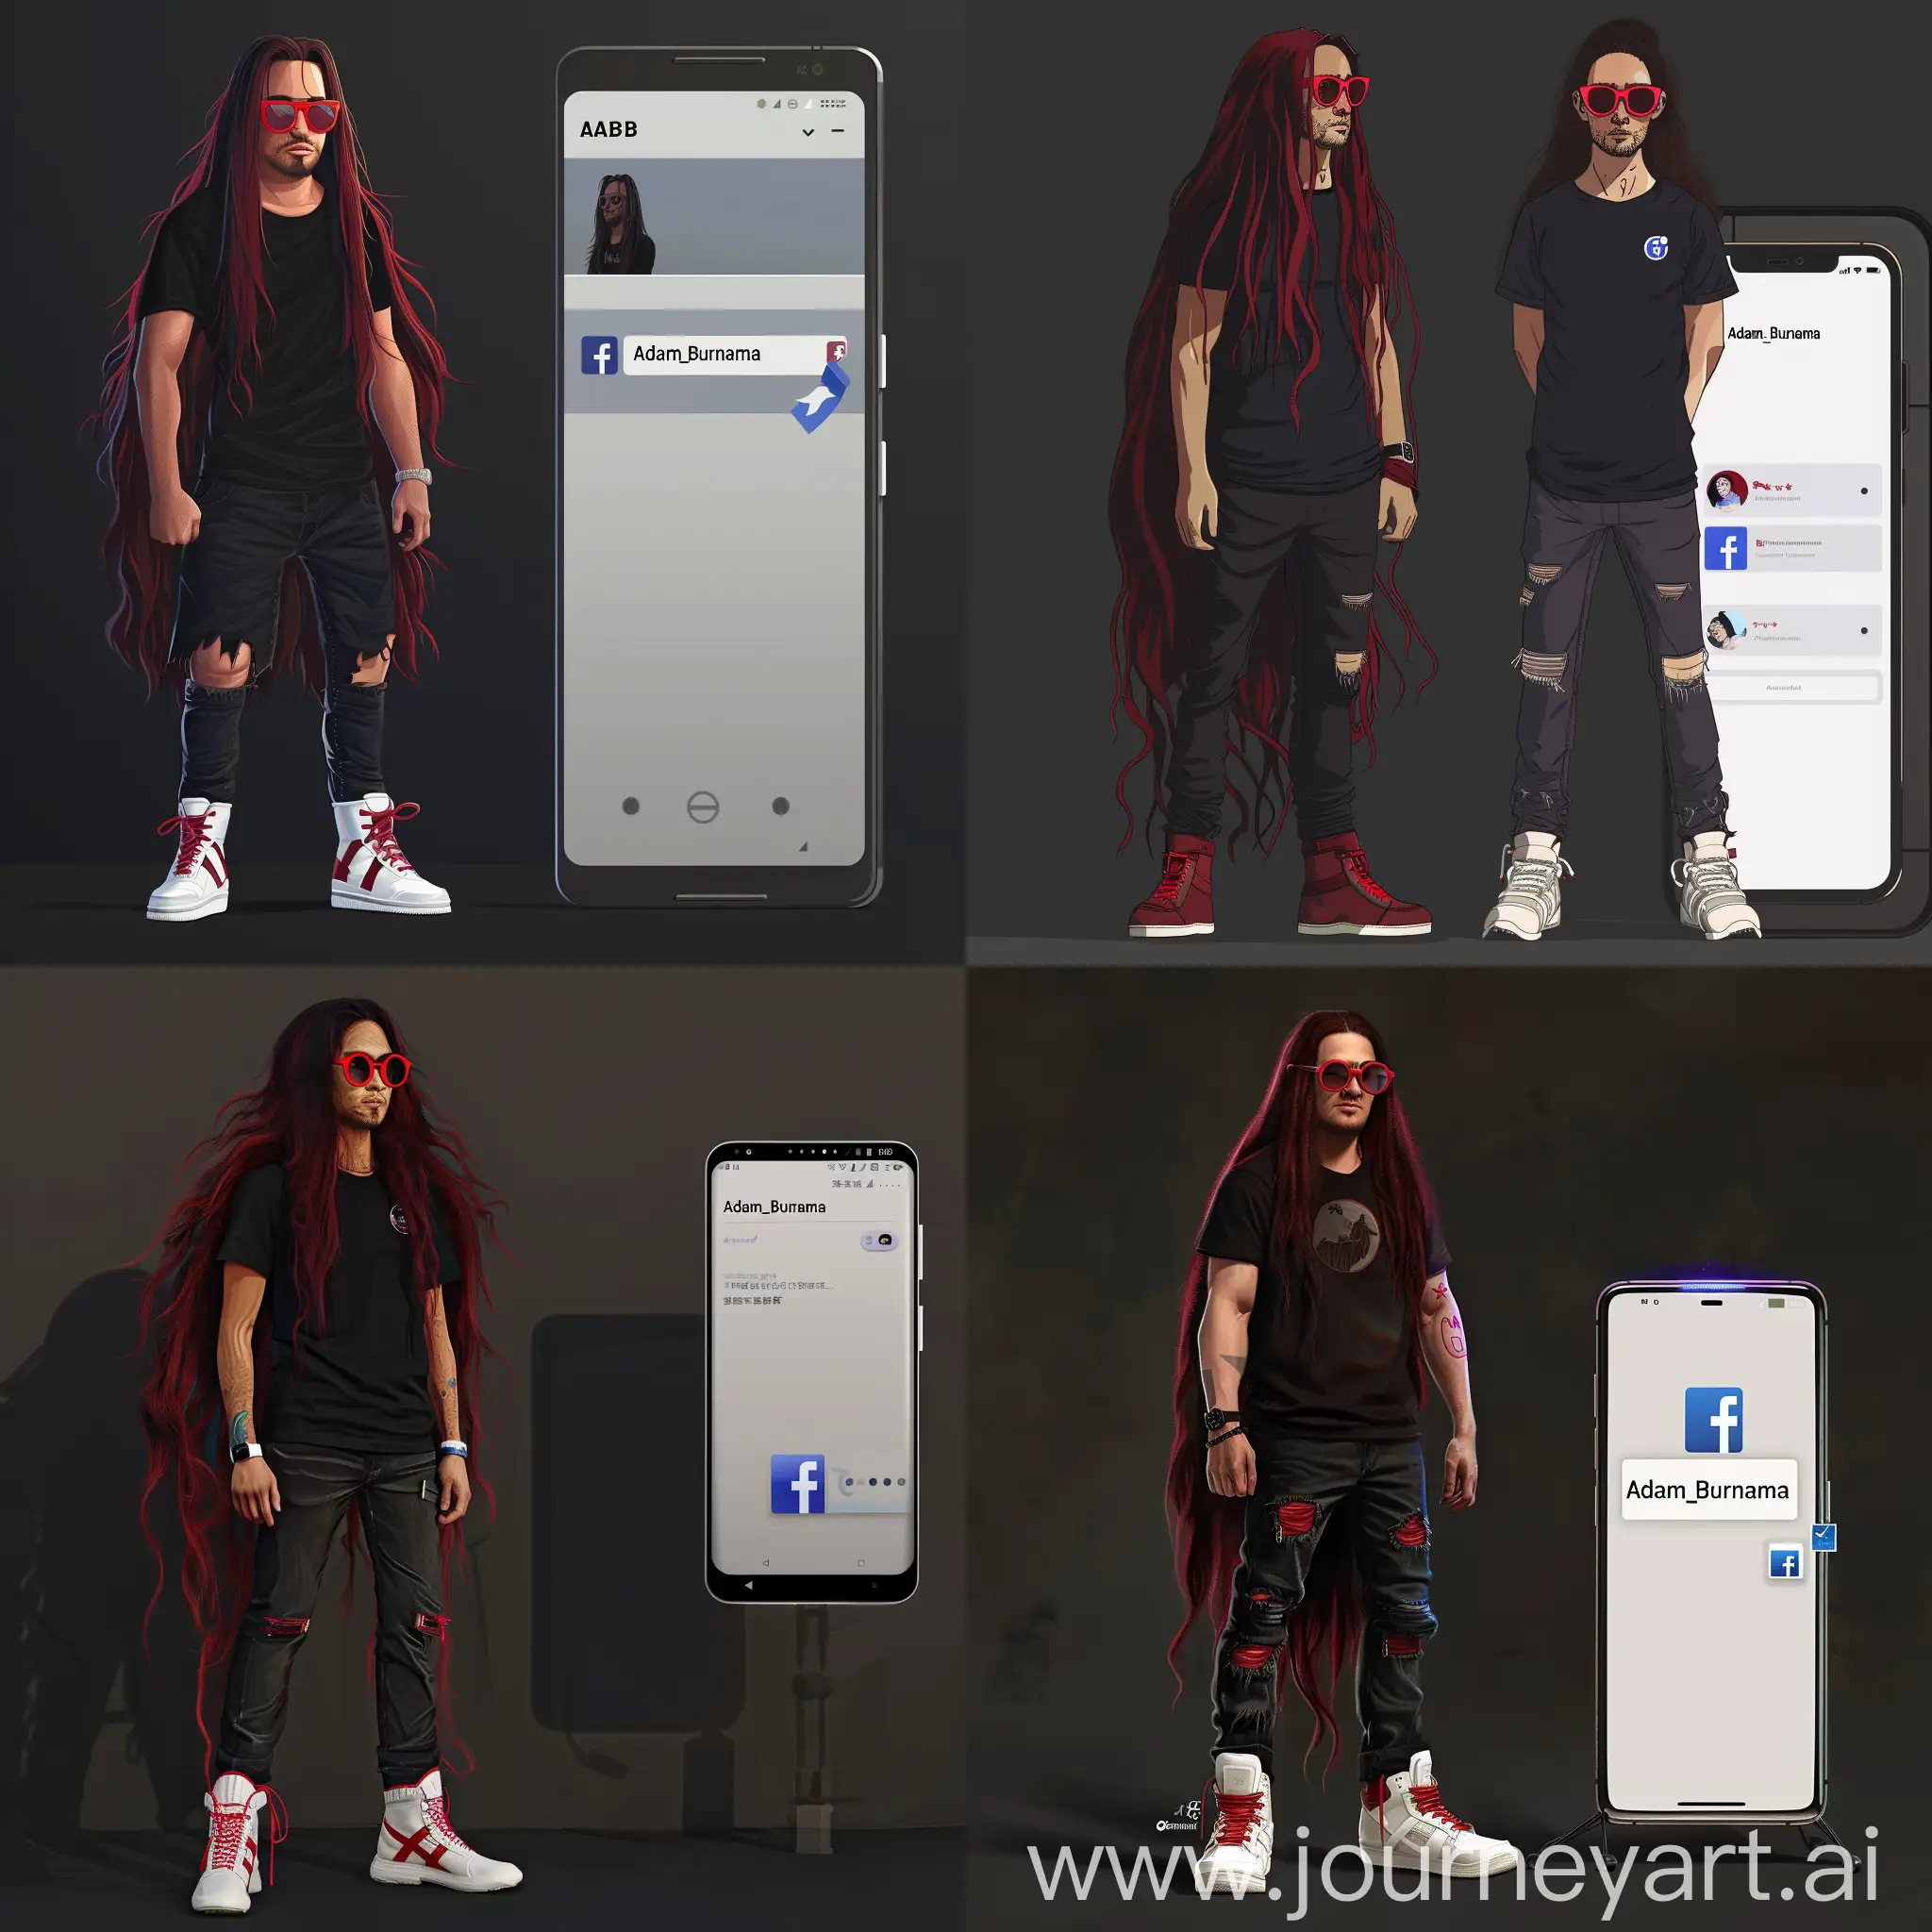 a man is standing against a dark background and this character has very long maroon hair, red glasses, a black t-shirt, black jeans, and white onitsuka boots, . to the right of the character, there is a large smartphone displaying a white Facebook profile with the username “Adam_Burnama” and a blue check symbol, which may indicate that the account is verified or popular. 8K-UHD. Very Realistic